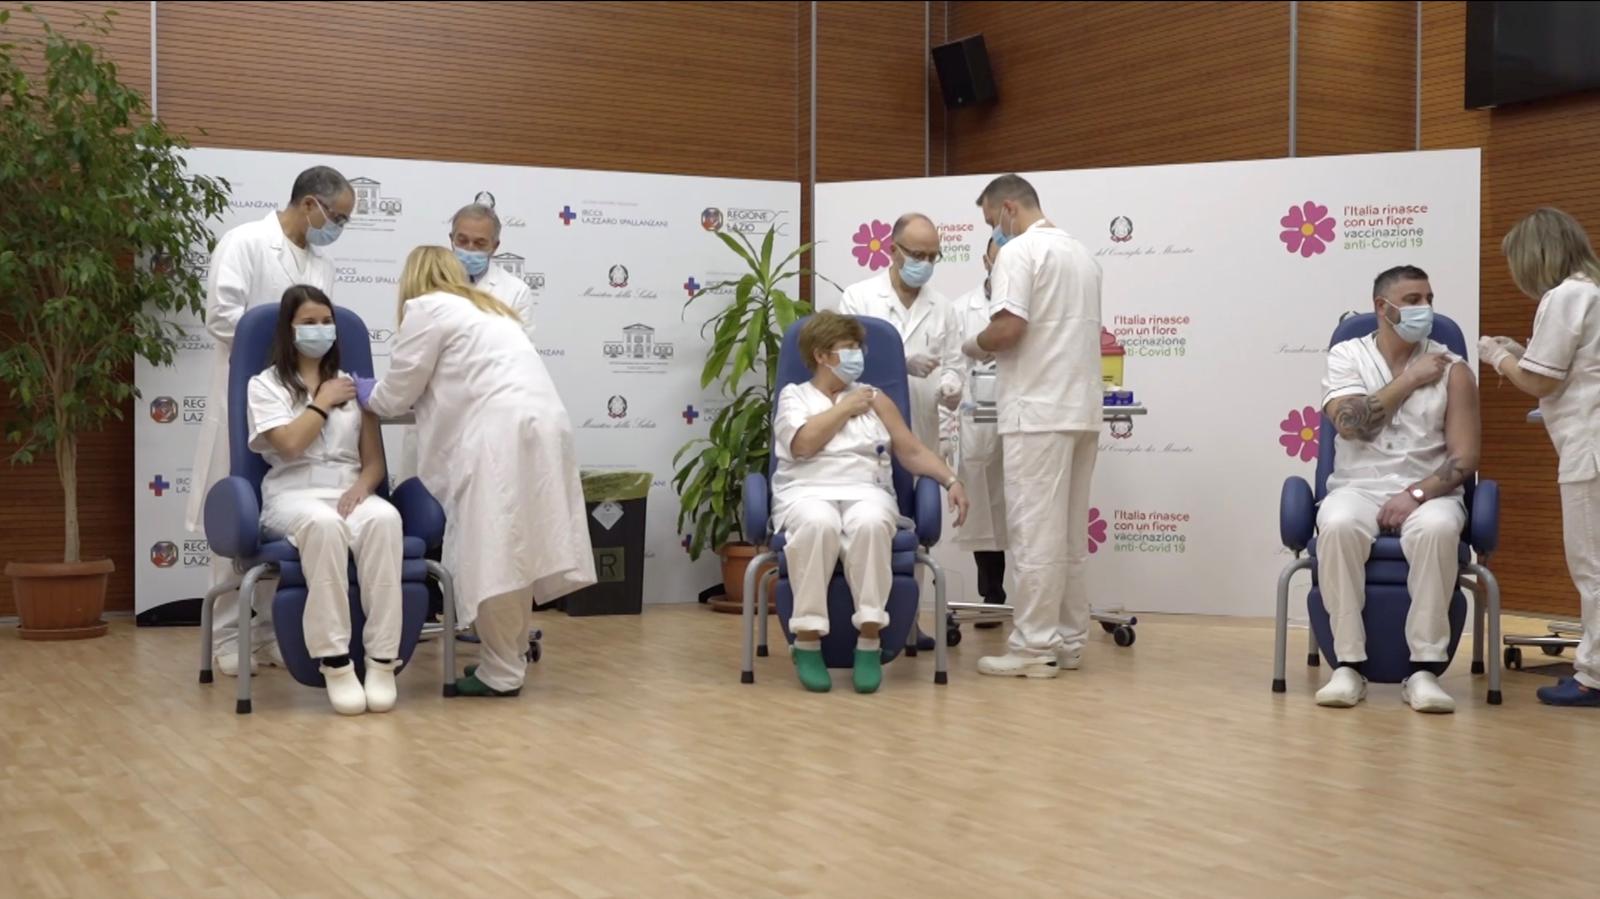 Claudia Alivernini, Maria Rosaria Capobianchi and Omar Altobelli, the first three recipients of Pfizer/BioNTech COVID-19 vaccine in Italy, receives their vaccination at the Spallanzani hospital in this screengrab taken from a video, in Rome, Italy December 27, 2020. Photo: Ministero della Salute/Handout via REUTERS